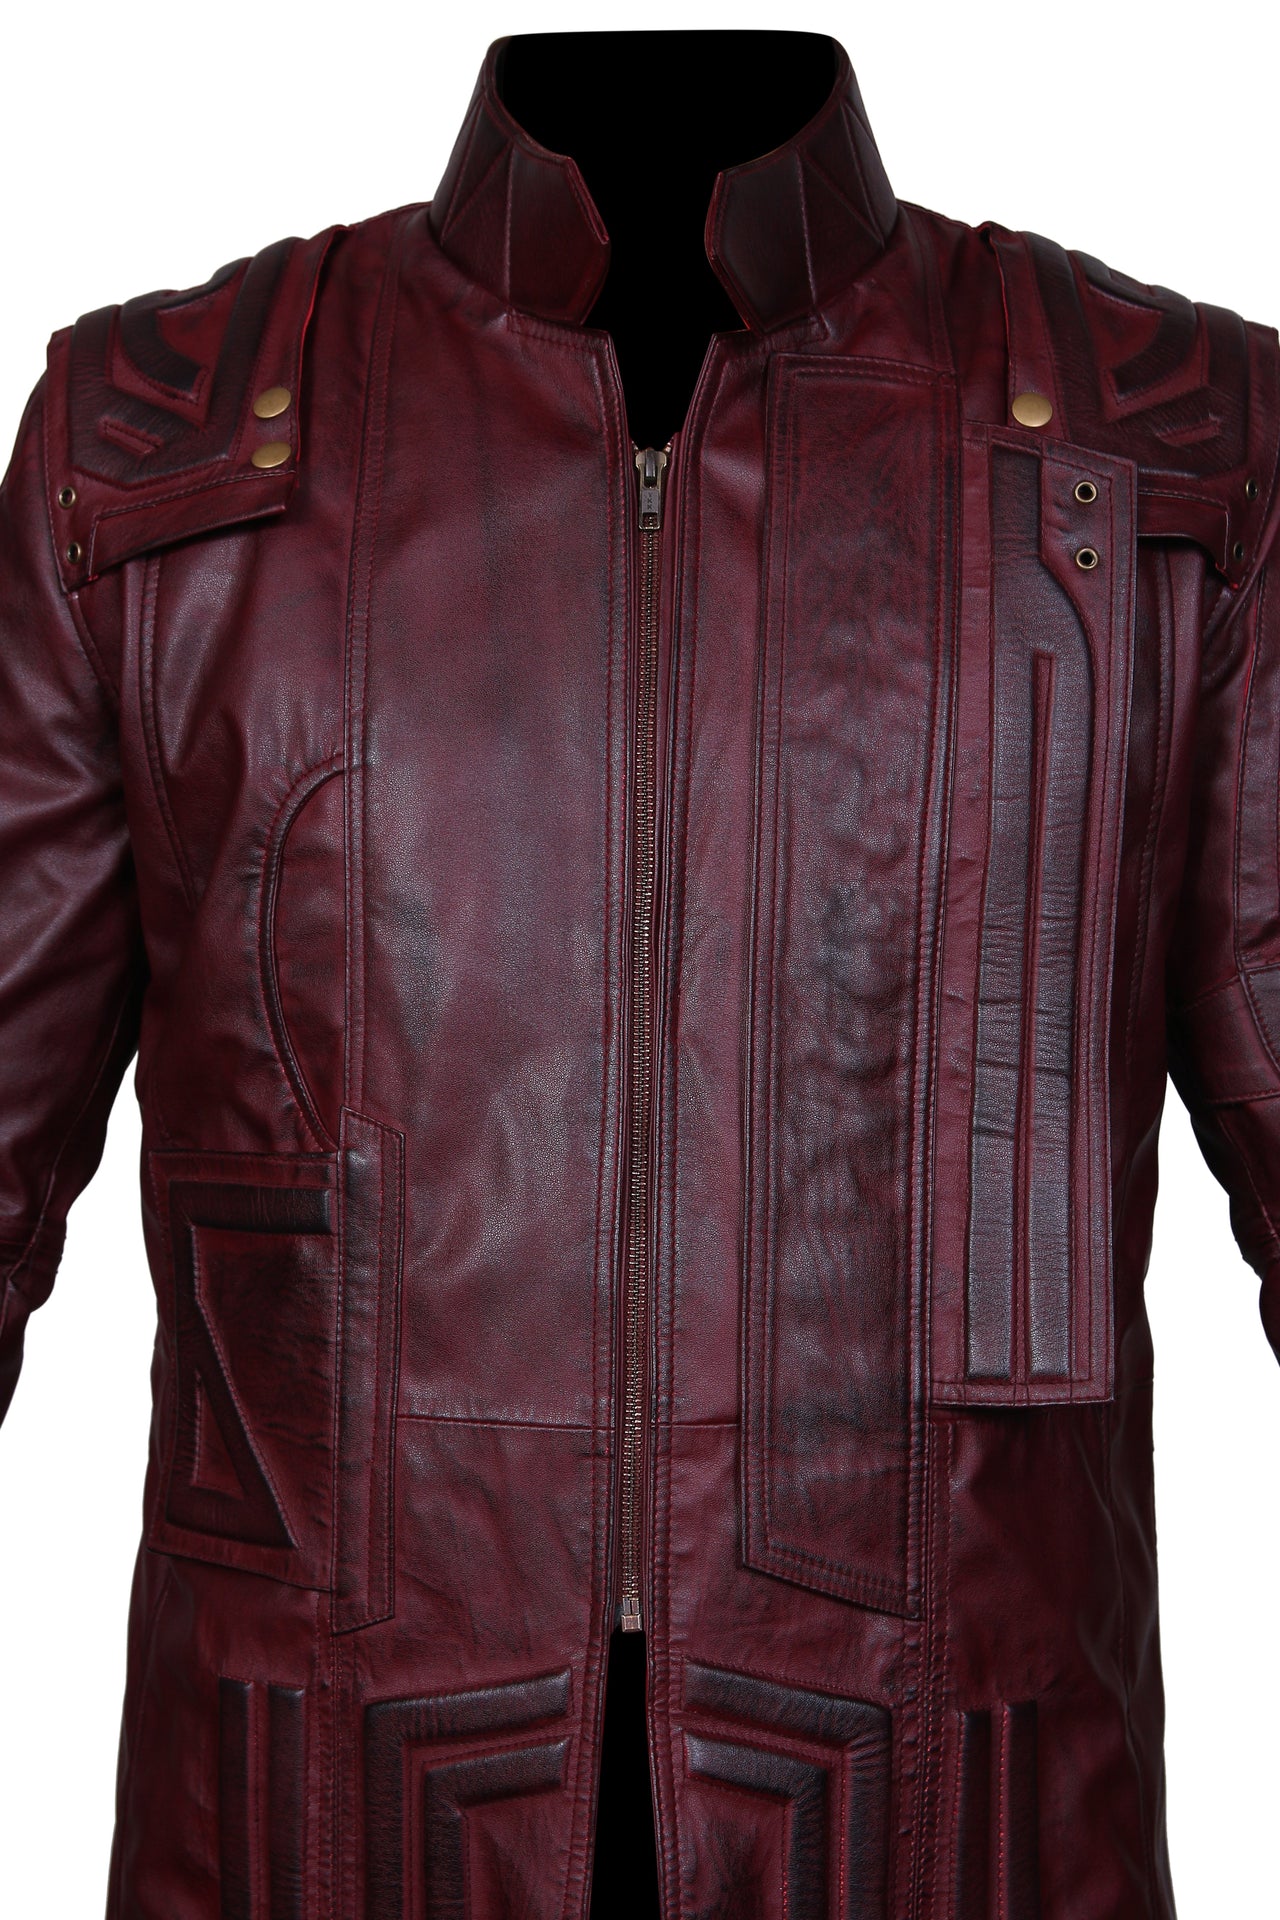 Men's New American Trench Maroon Leather Coat